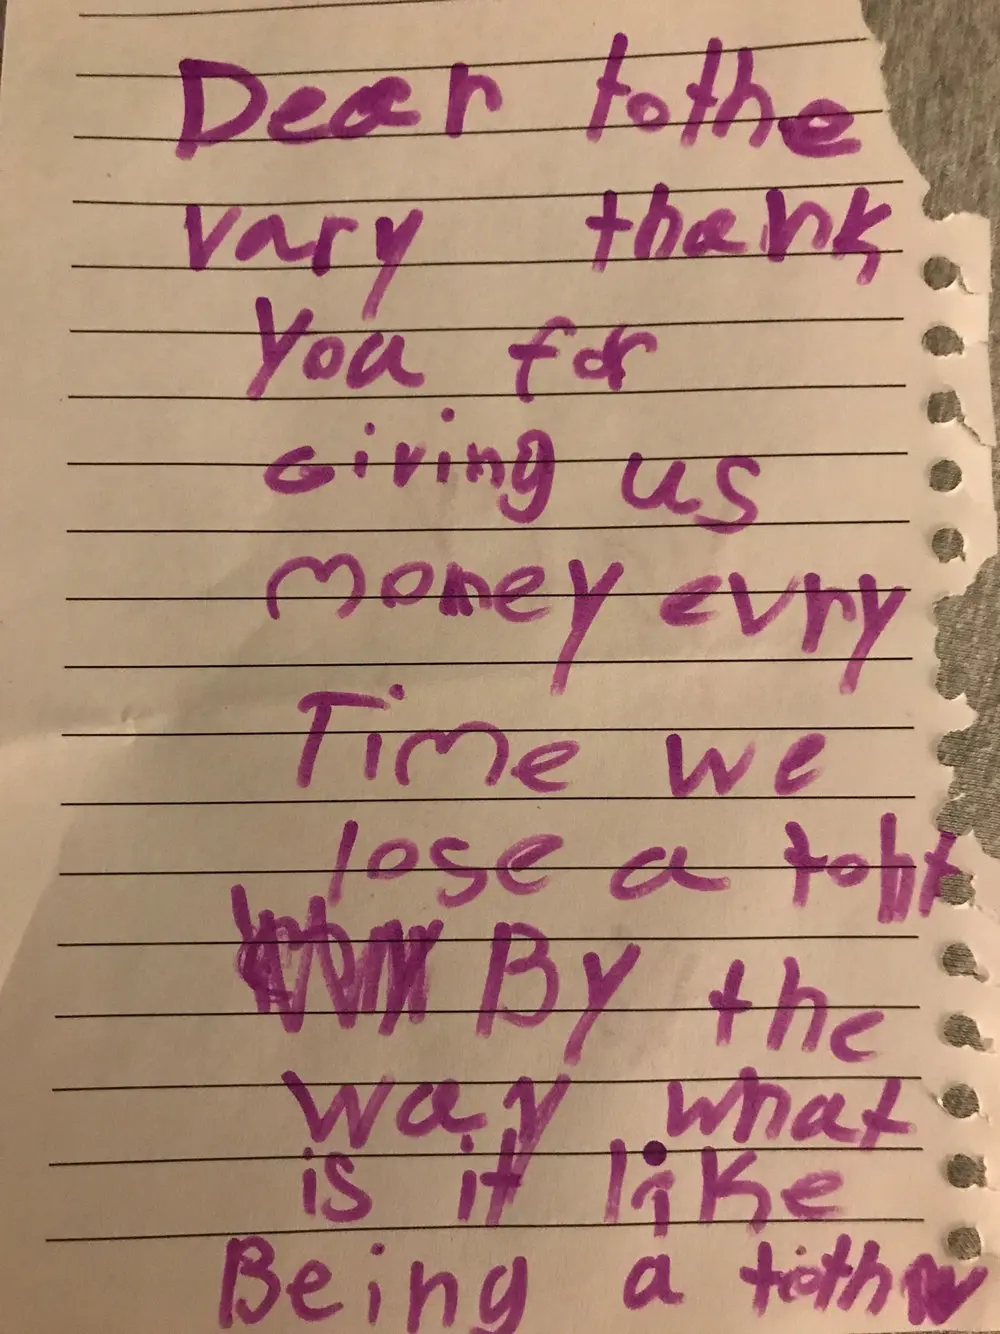 Dear Tooth Fairy, Thank you for giving us money every time we lose a tooth. By the way, what is it like being a tooth fairy?